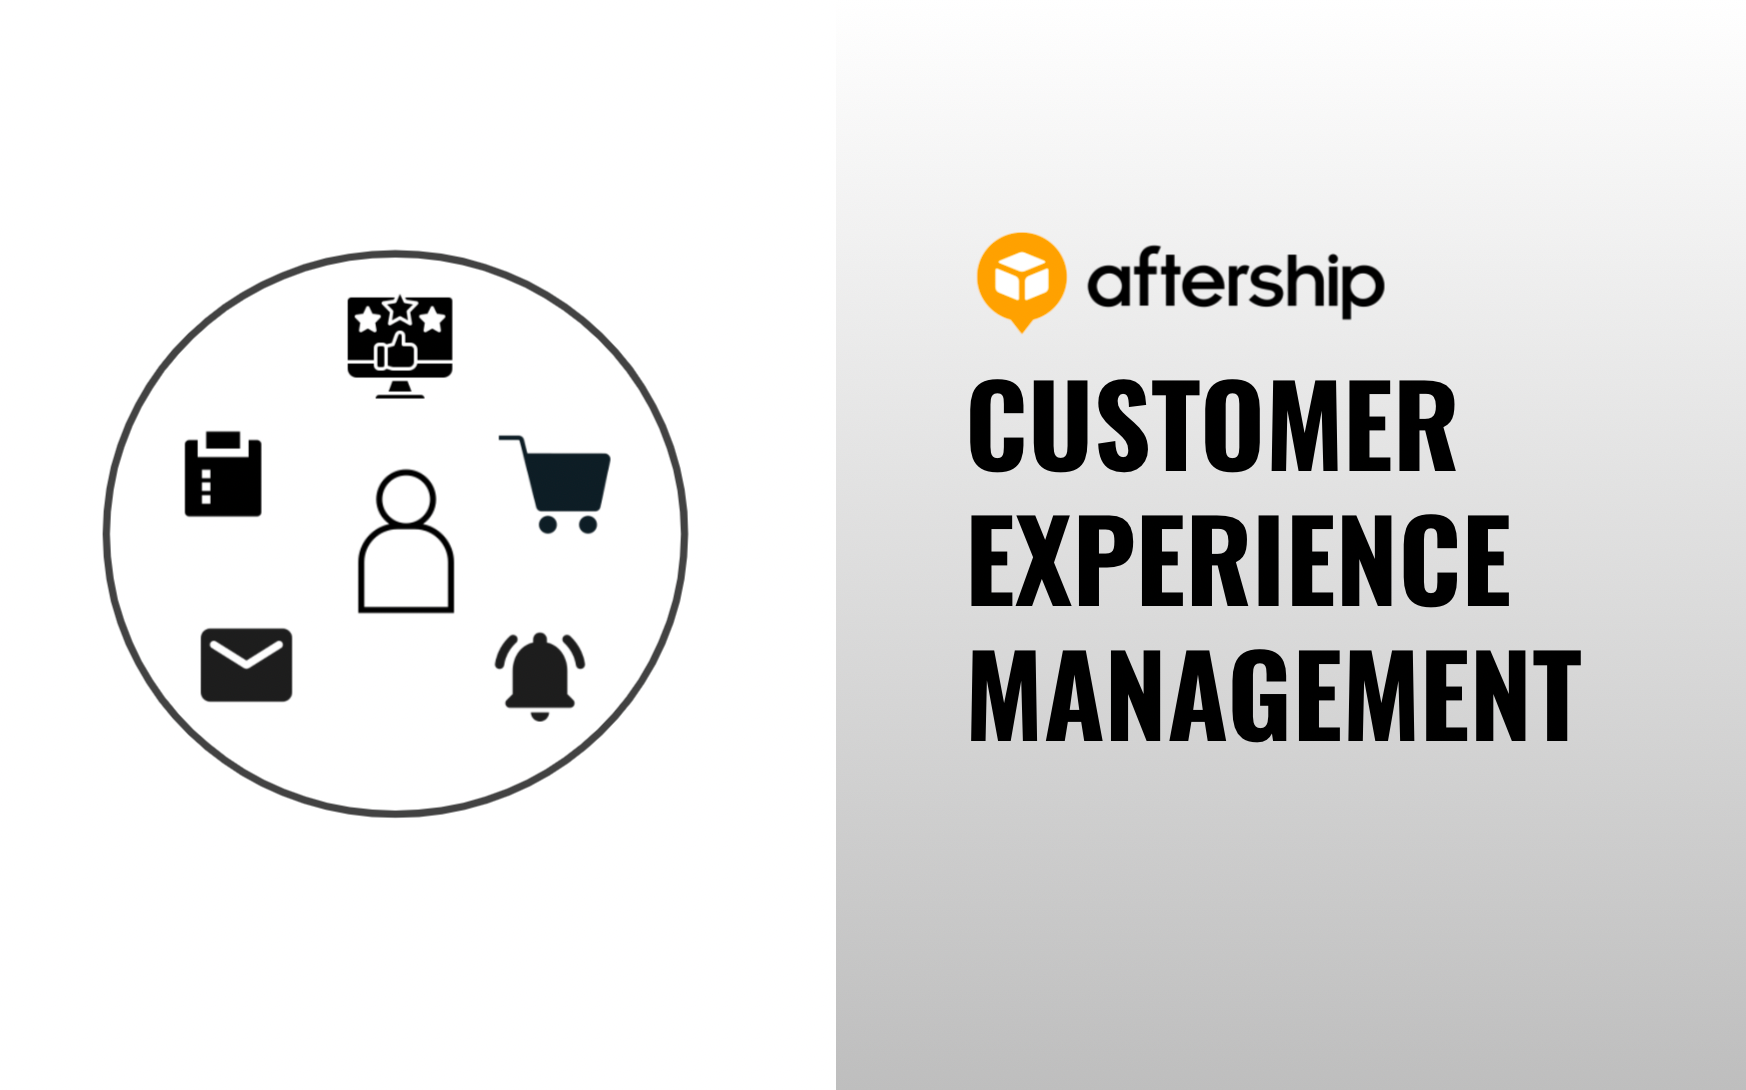 Customer experience management: What is it and how to leverage it for your business?